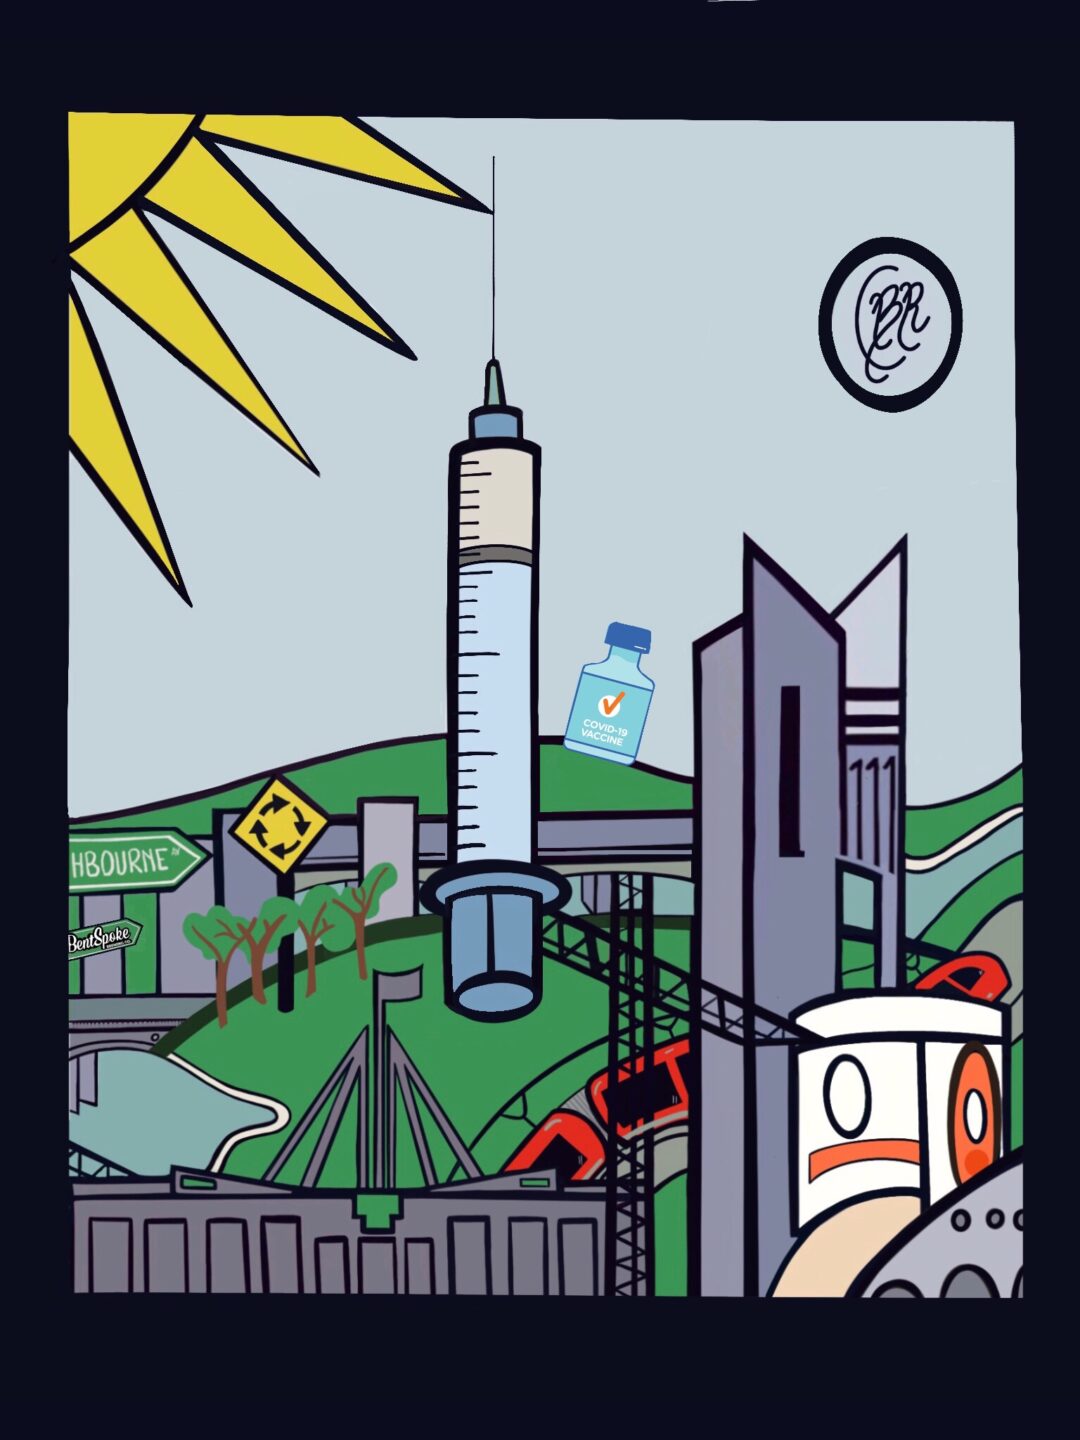 An illustration of a syringe surrounded by Canberra icons including parliament house and the national carillon